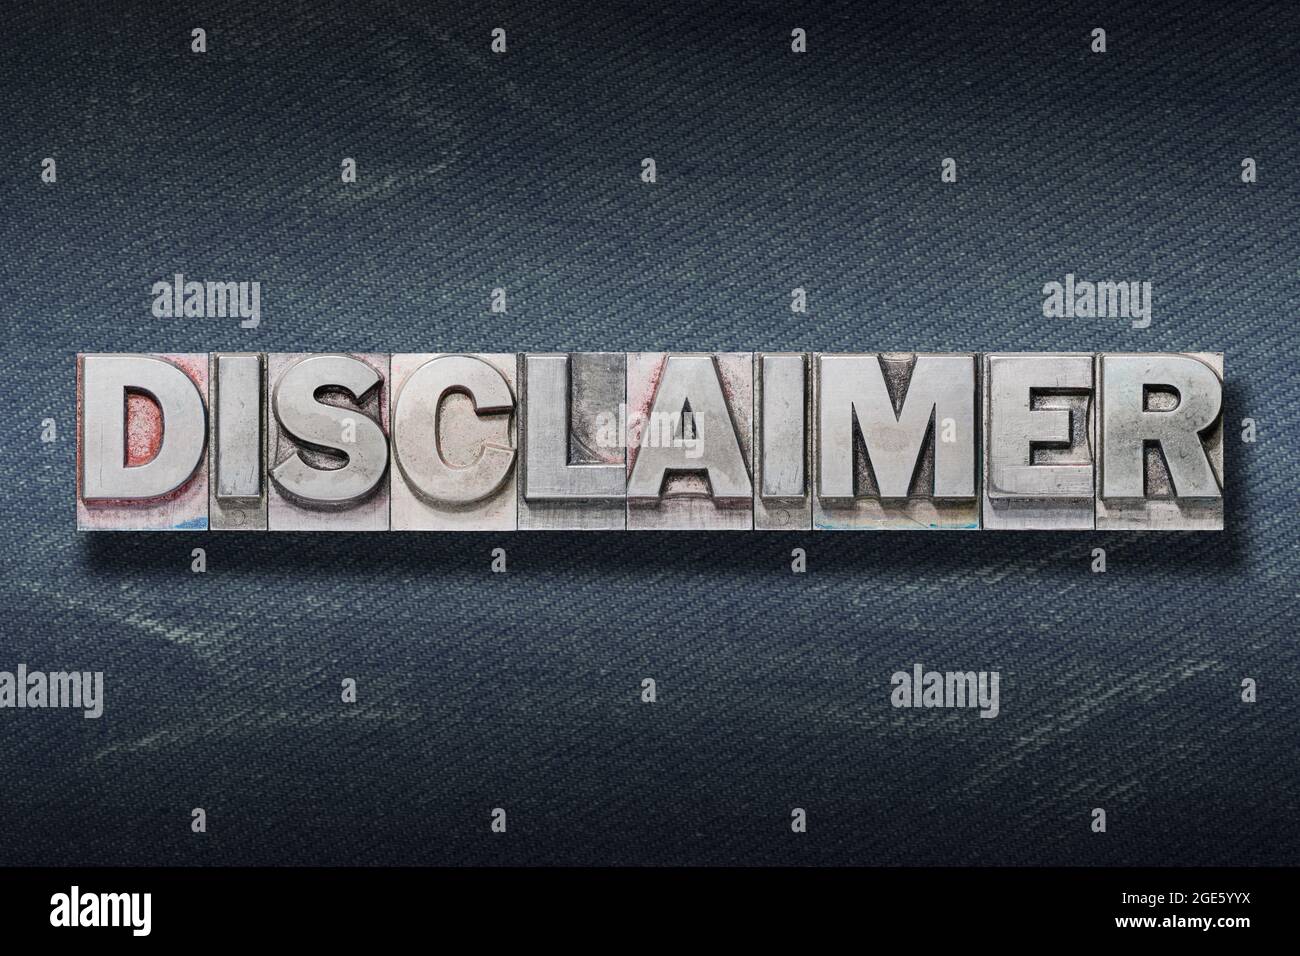 disclaimer word made from metallic letterpress on dark jeans background Stock Photo